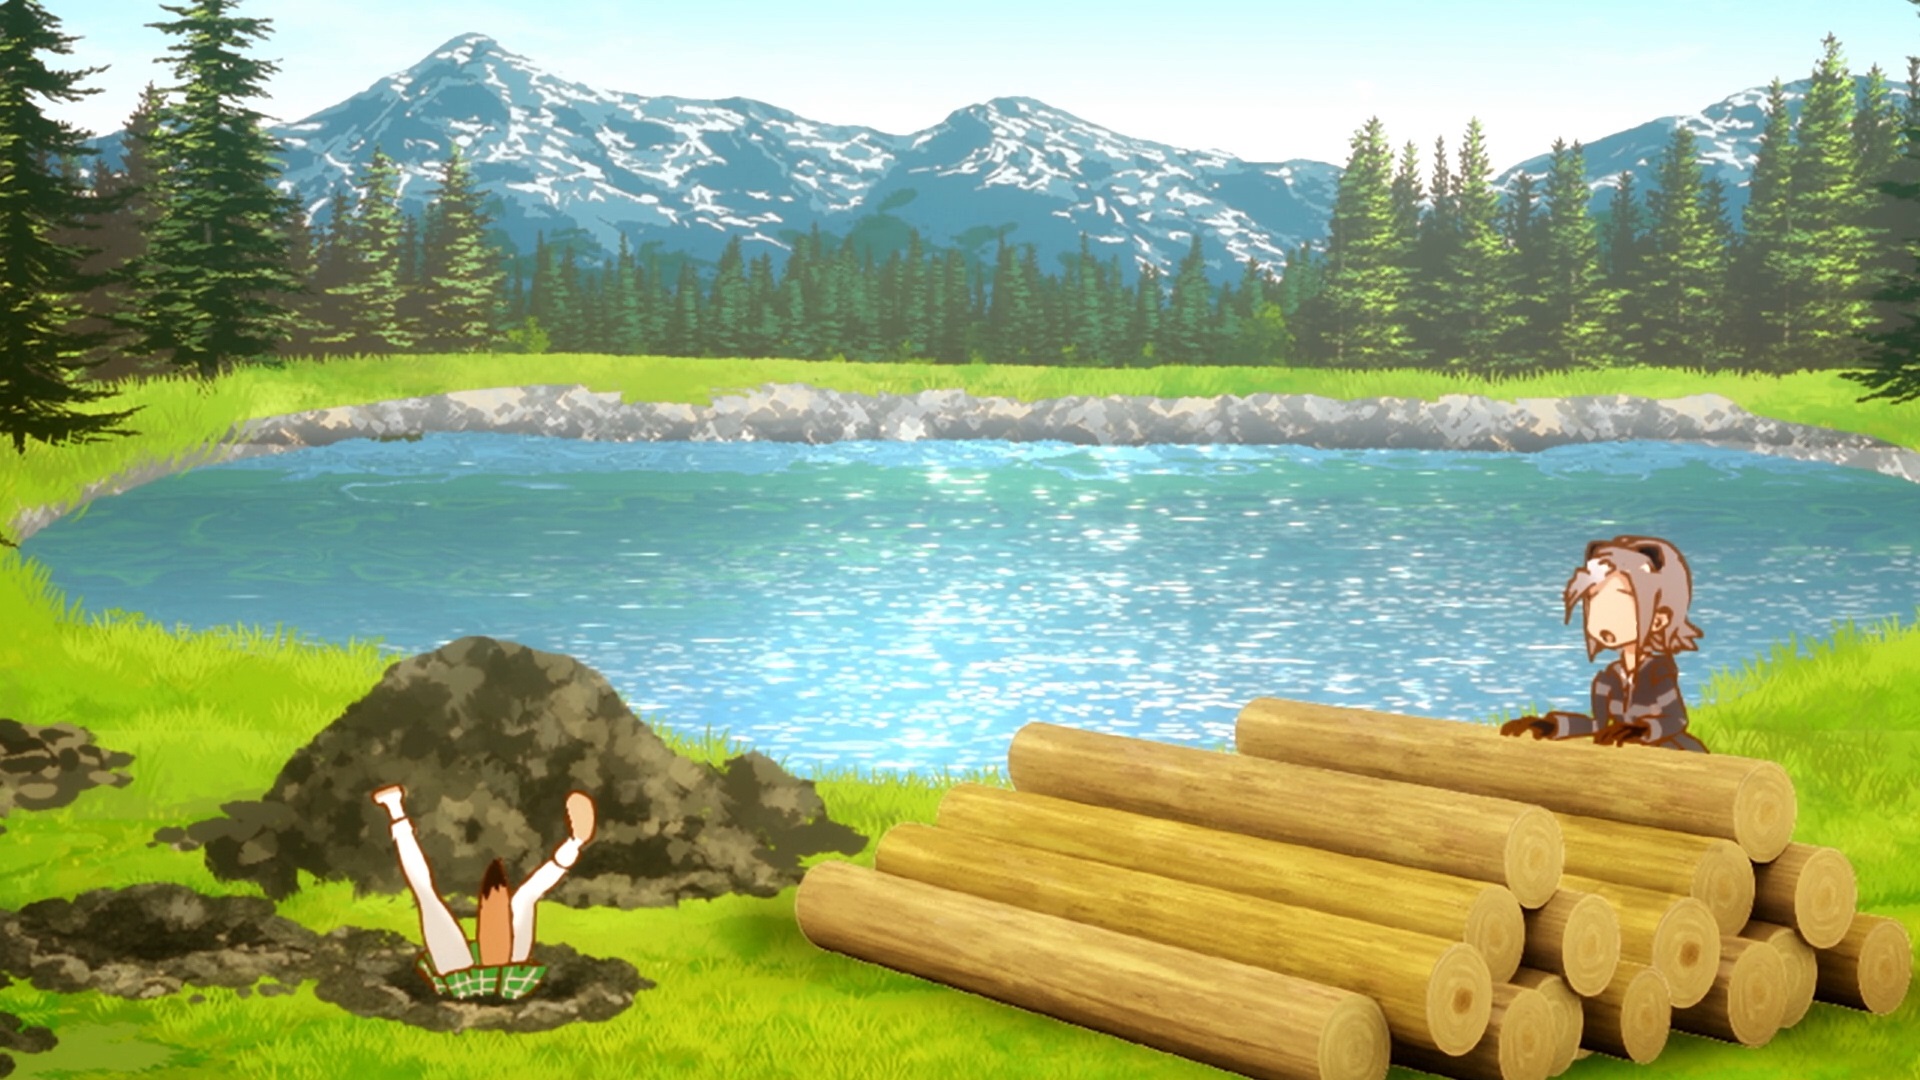 A Lake Shore in OP from Anime Season 1.